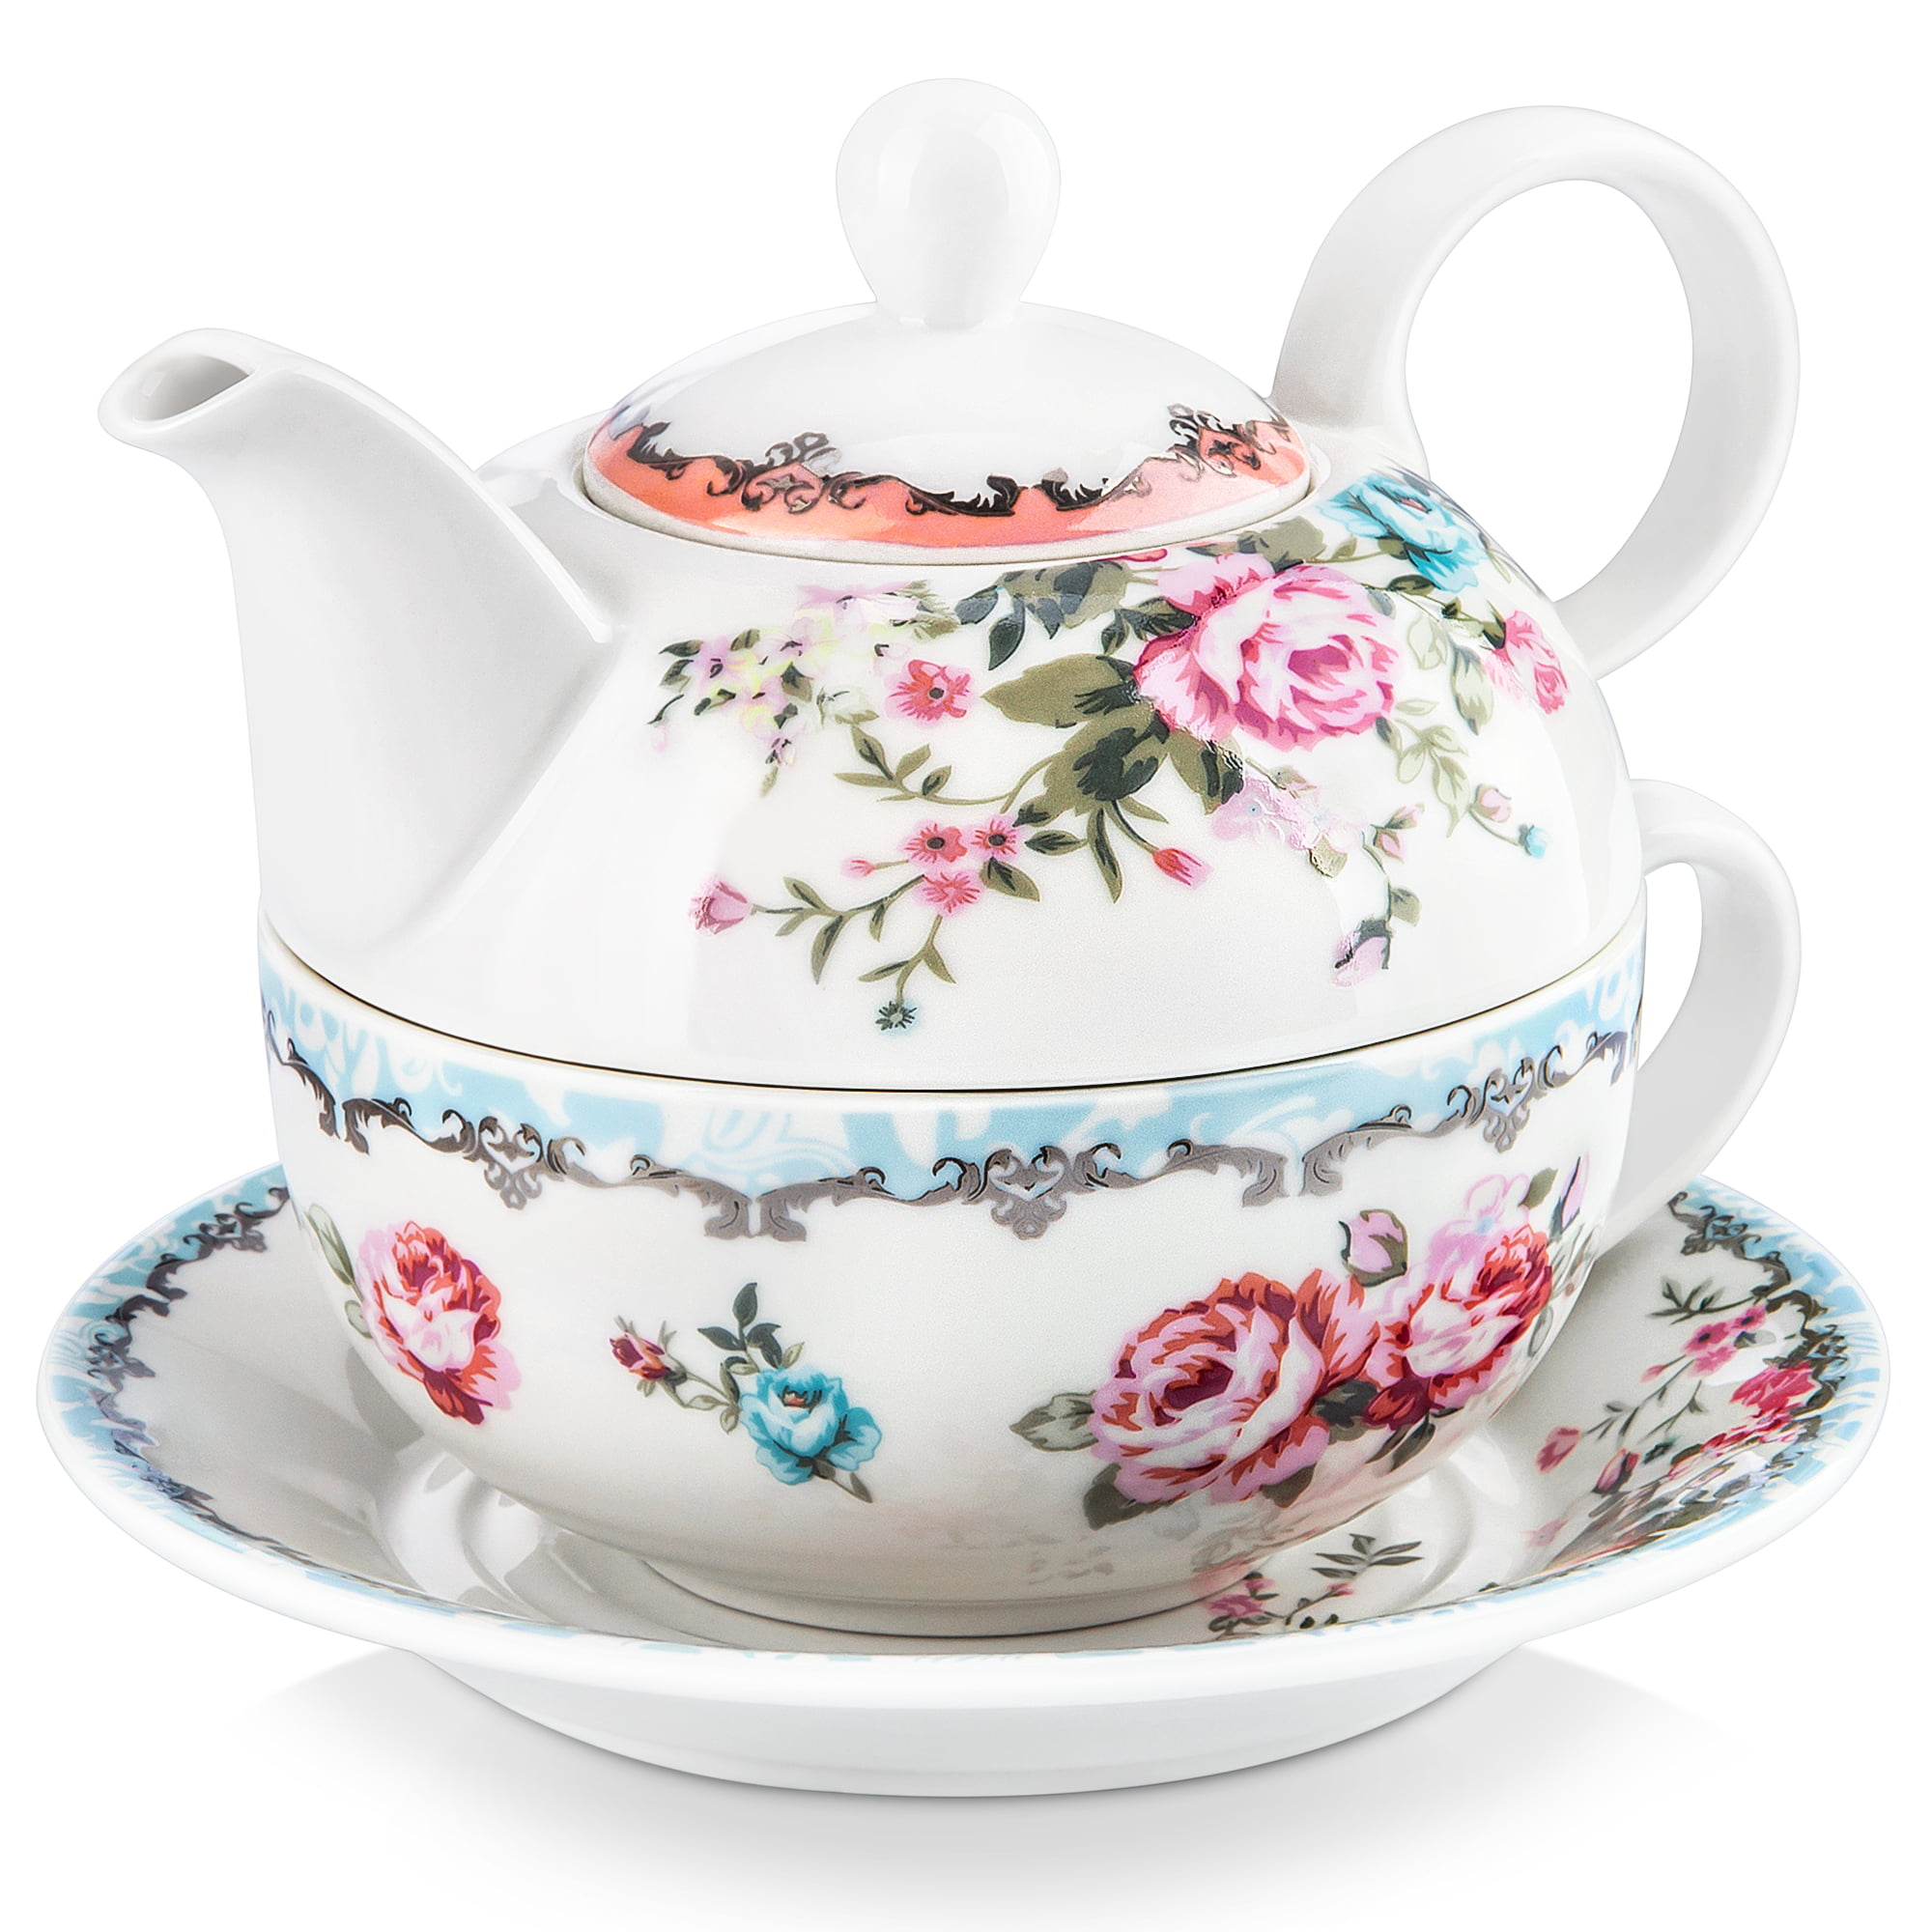 Series Sweet.time MALACASA 1-Piece 5.5 Cup and 1-Piece 6 Saucer 4-Piece Tea-for-one Set Cream White Porcelain China Ceramic Combi-Set with 1-Set 6.7 Teapot with The Lid 